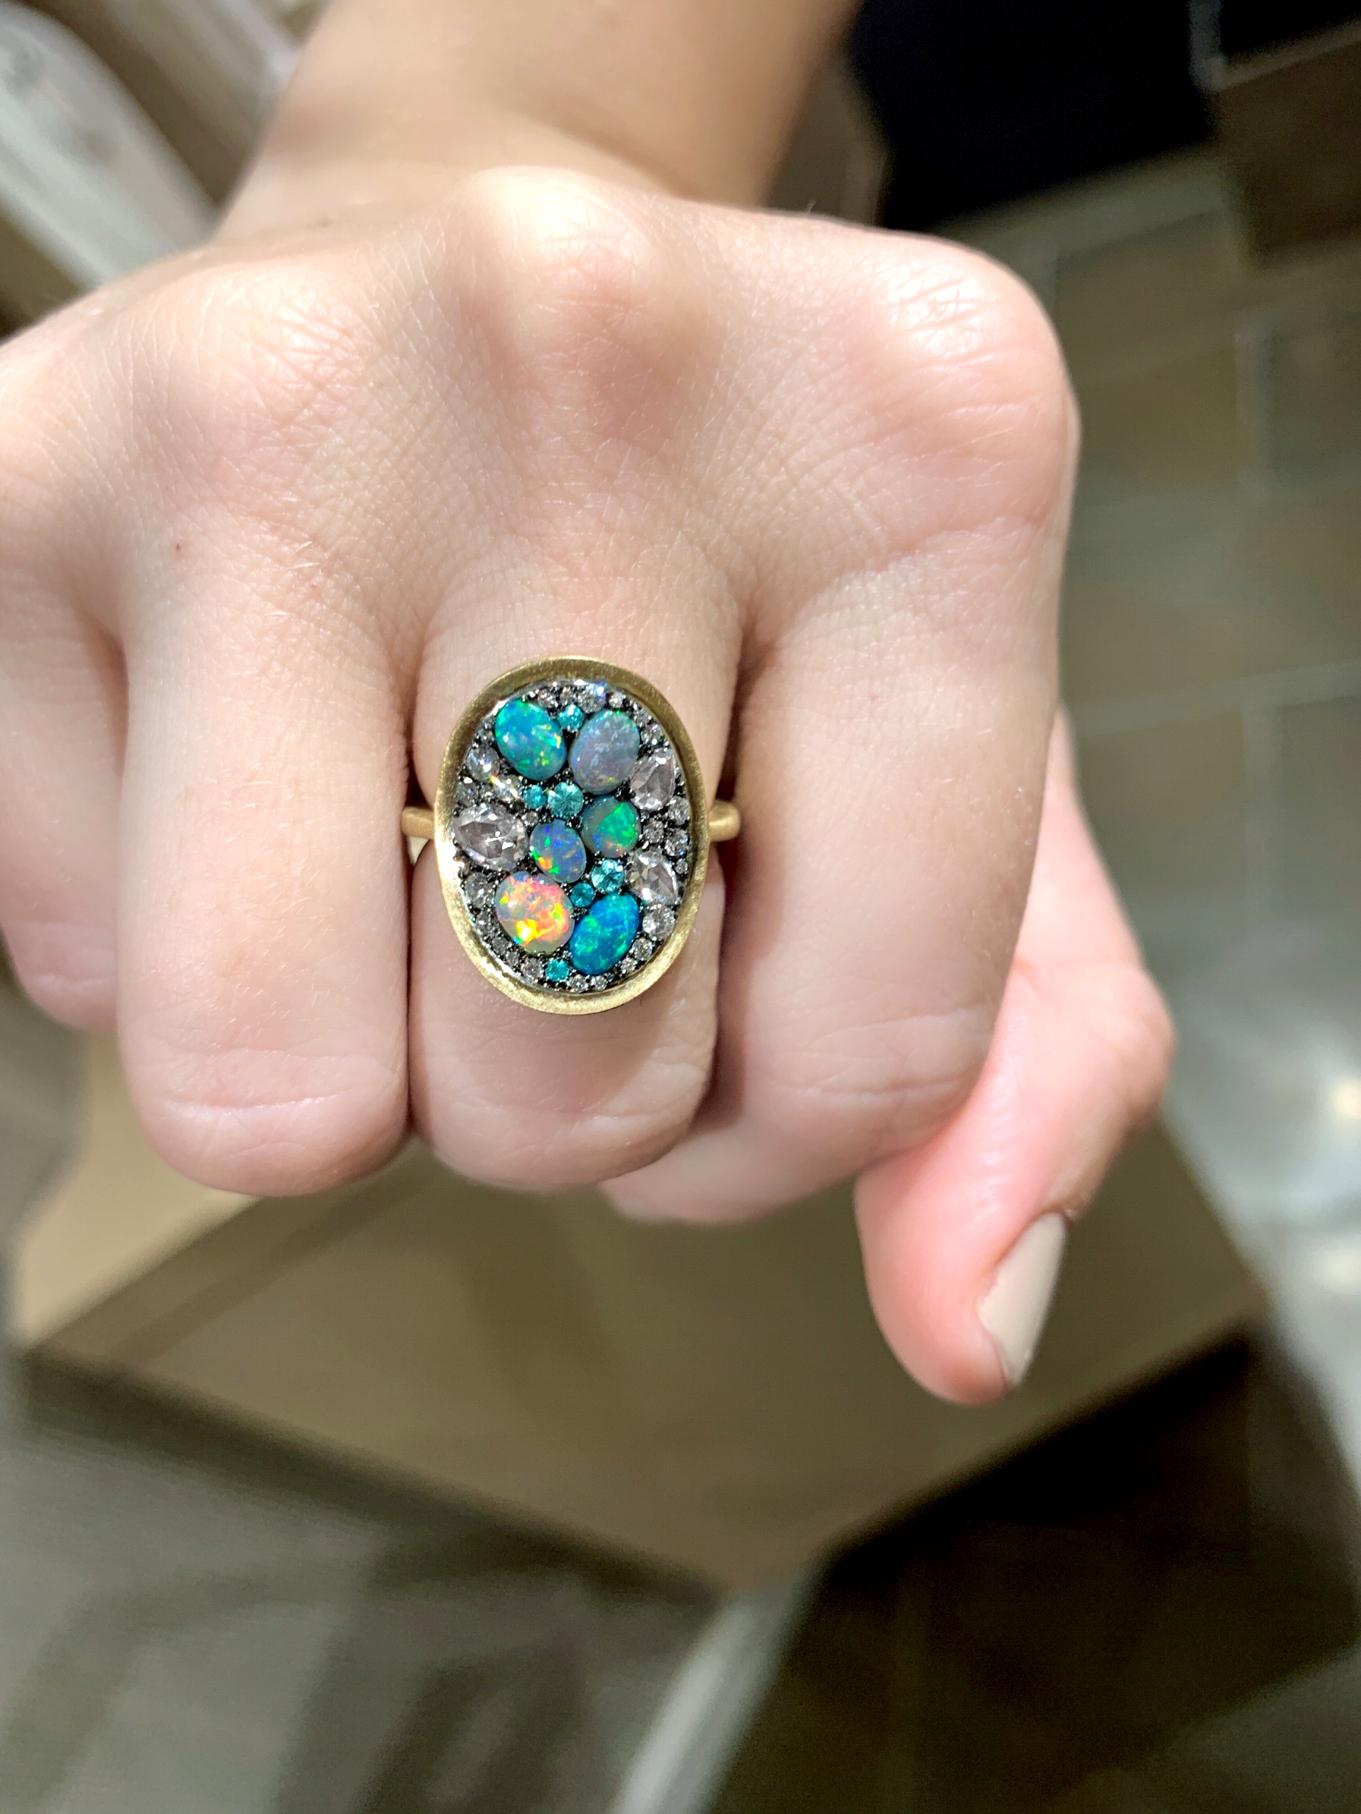 One of a kind Starstruck Ring handmade in Belgium by jewelry artist Joke Quick in matte-finished 18k yellow gold and blackened sterling silver featuring six exceptional Australian lightning ridge black opal cabochons totaling 1.09 carats, six